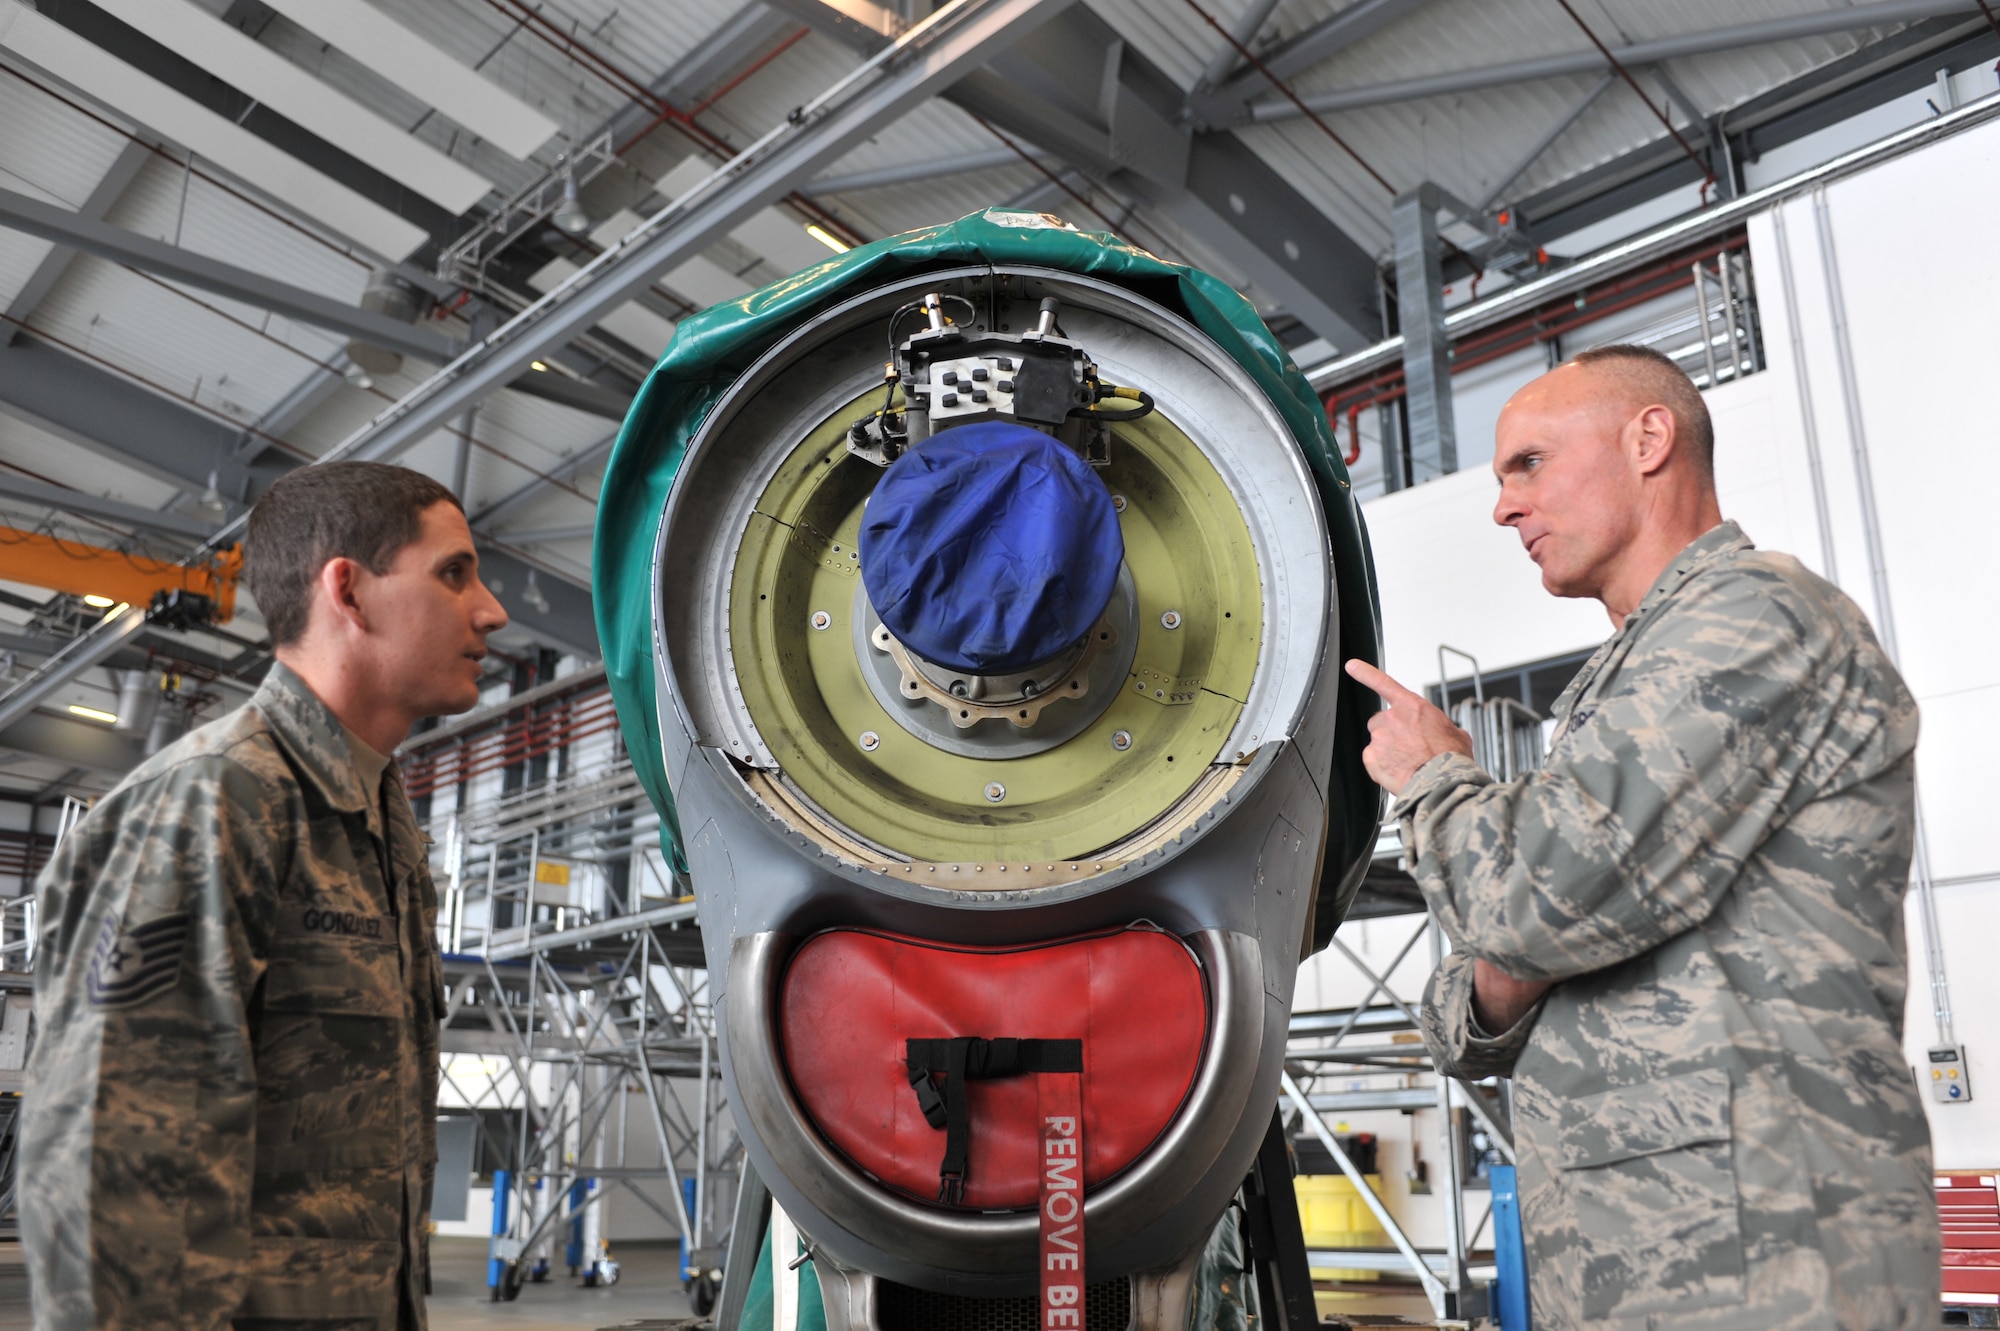 Lt. Gen. Craig Franklin, 3rd Air Force commander, is briefed on the specifics of the Maintenance Squadron by Tech. Sgt. Ramiro Gonzalez, 86th Aircraft Maintenance Squadron, on Ramstein Air Base, Germany, April 11, 2012. This visit gave Franklin the opportunity to see firsthand the various capabilities each unit brings to the fight.  The immersion marked the first official visit since he assumed command March 30. (U.S. Air Force photo/ Airman 1st Class Caitlin O'Neil-McKeown)